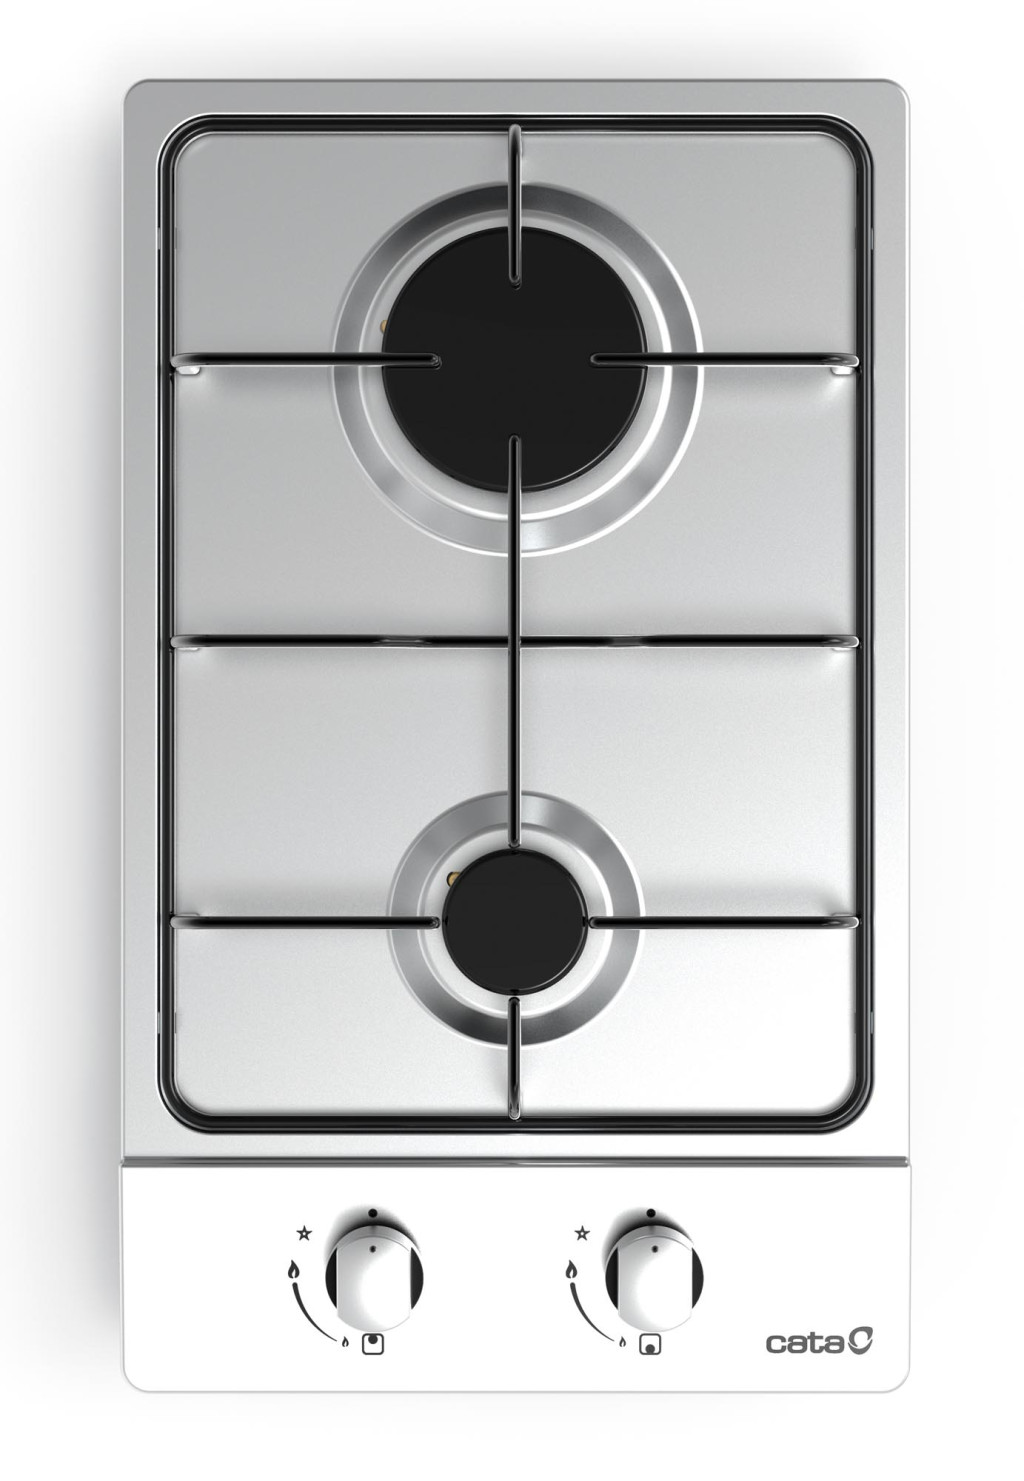 CATA Hob GI 3002 X Gas, Number of burners/cooking zones 2, Rotary knobs, Stainless steel